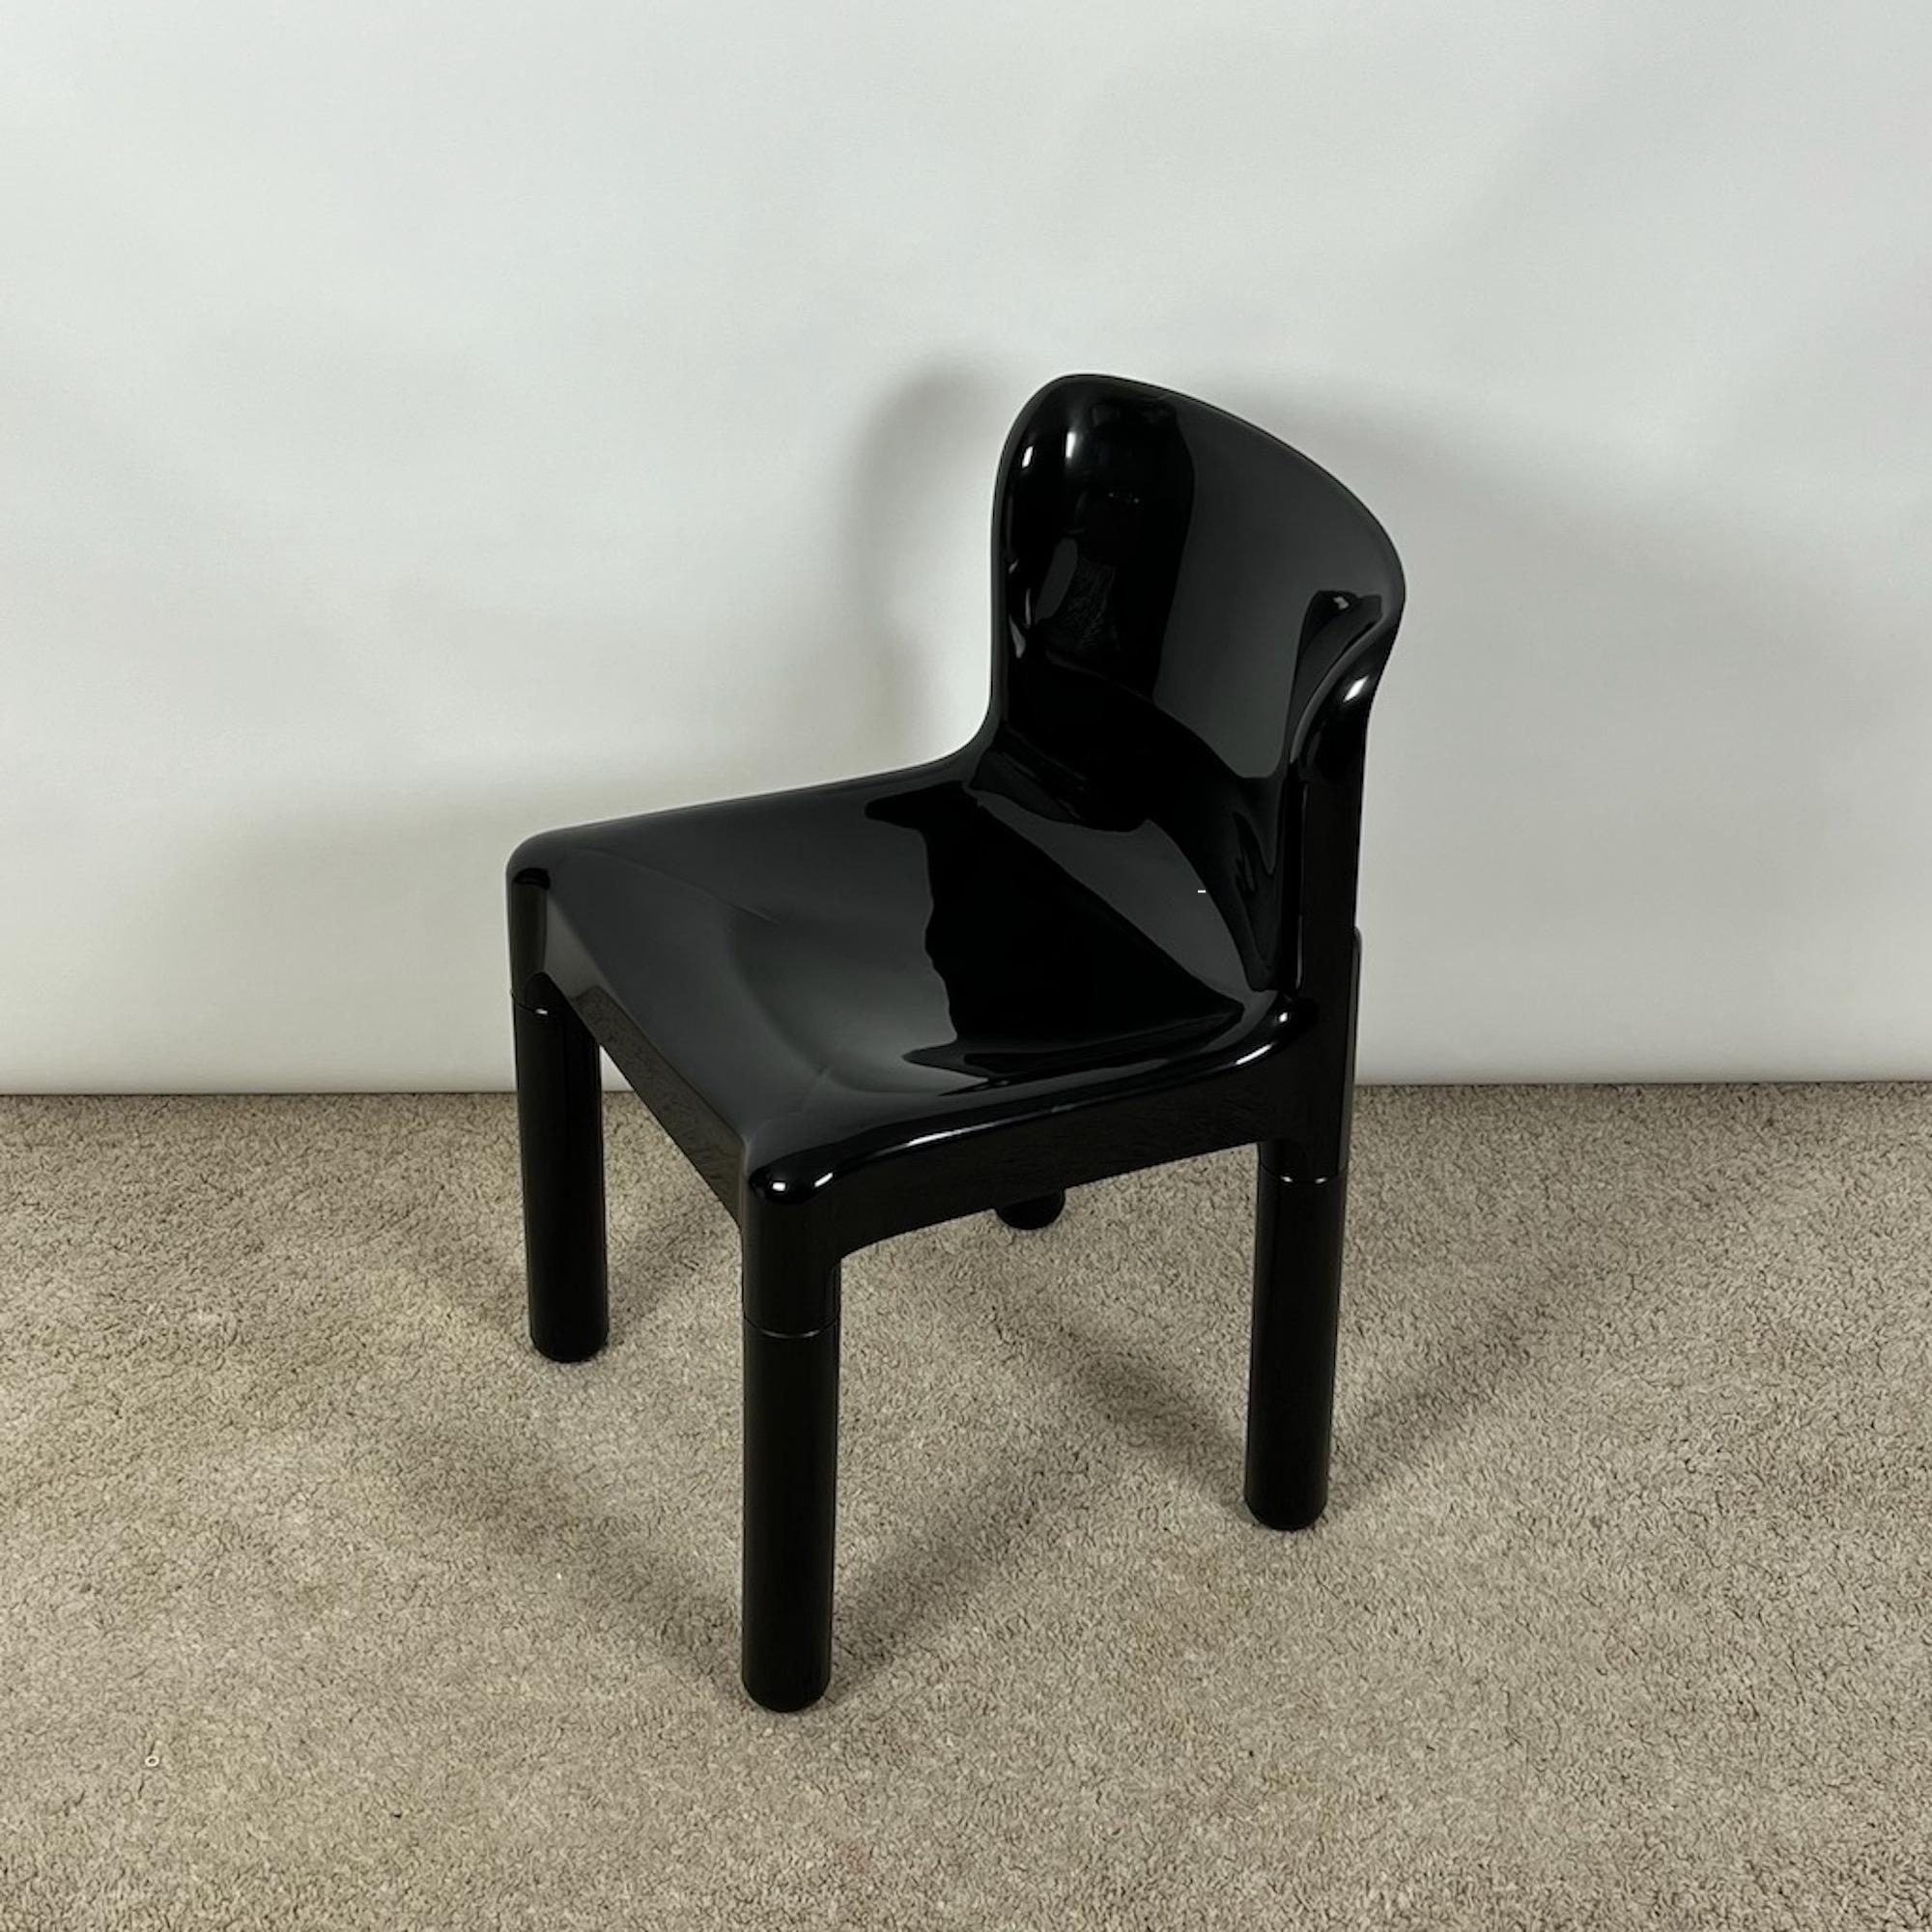 Mid-century Kartell Model 4875 Chair, designed by Carlo Bartoli in the 70s. A groundbreaking creation, the 4875 is hailed as the world’s first chair made of injection-molded polypropylene, showcasing Bartoli’s innovative vision. Kartell commenced